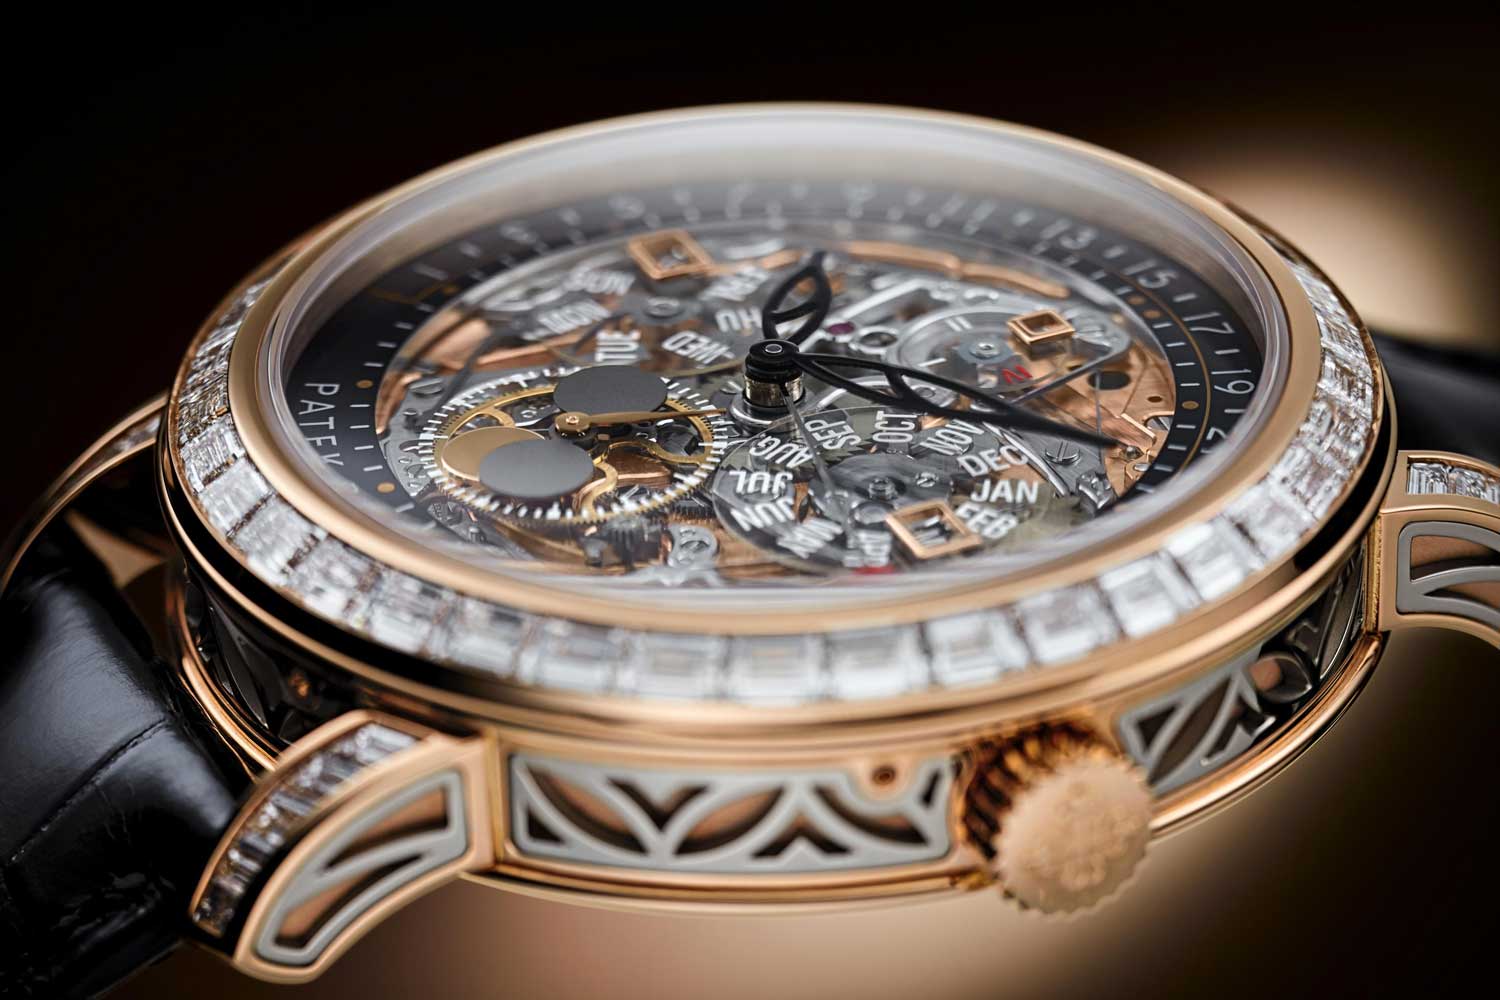 The ref. 5304/301R has its bezel, case and clasp set with 80 baguette diamonds.